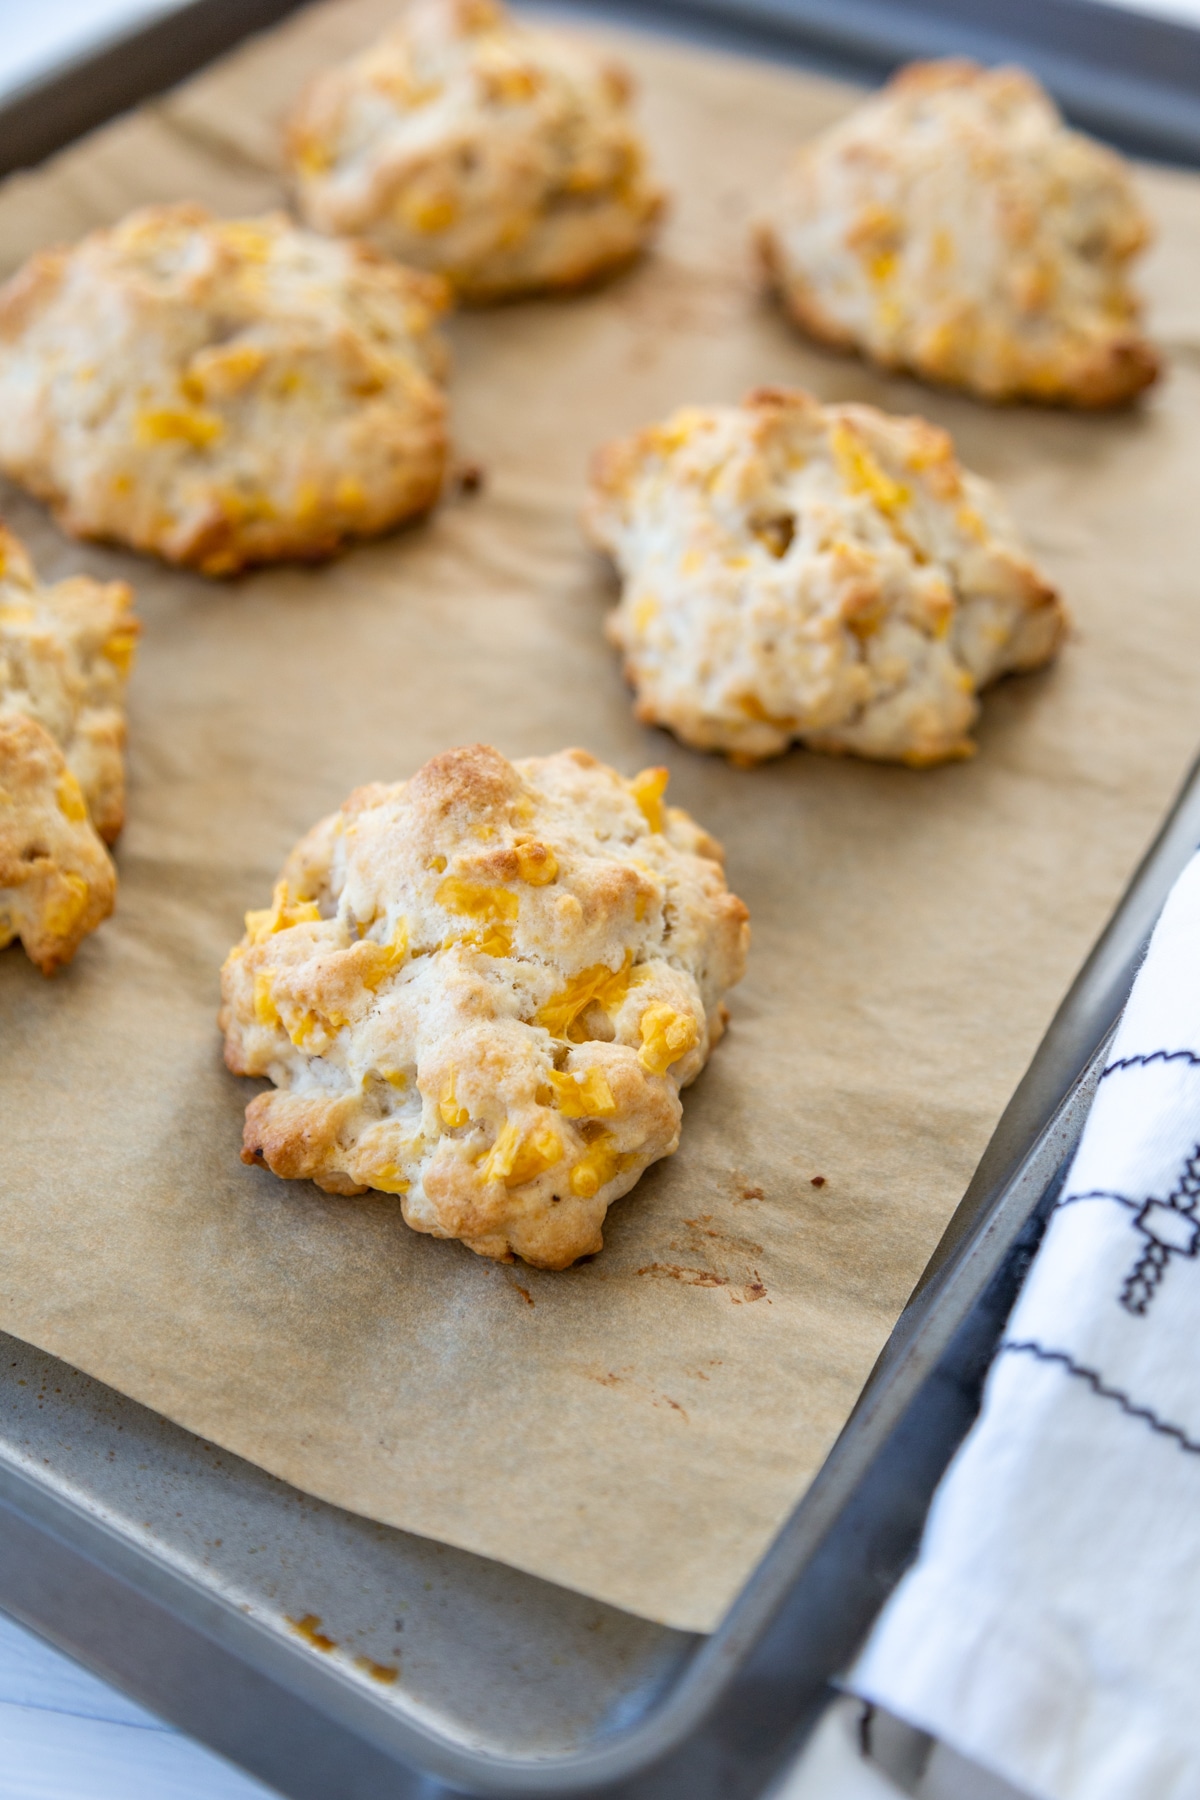 6 cheddar biscuits on a parchment lined baking sheet.